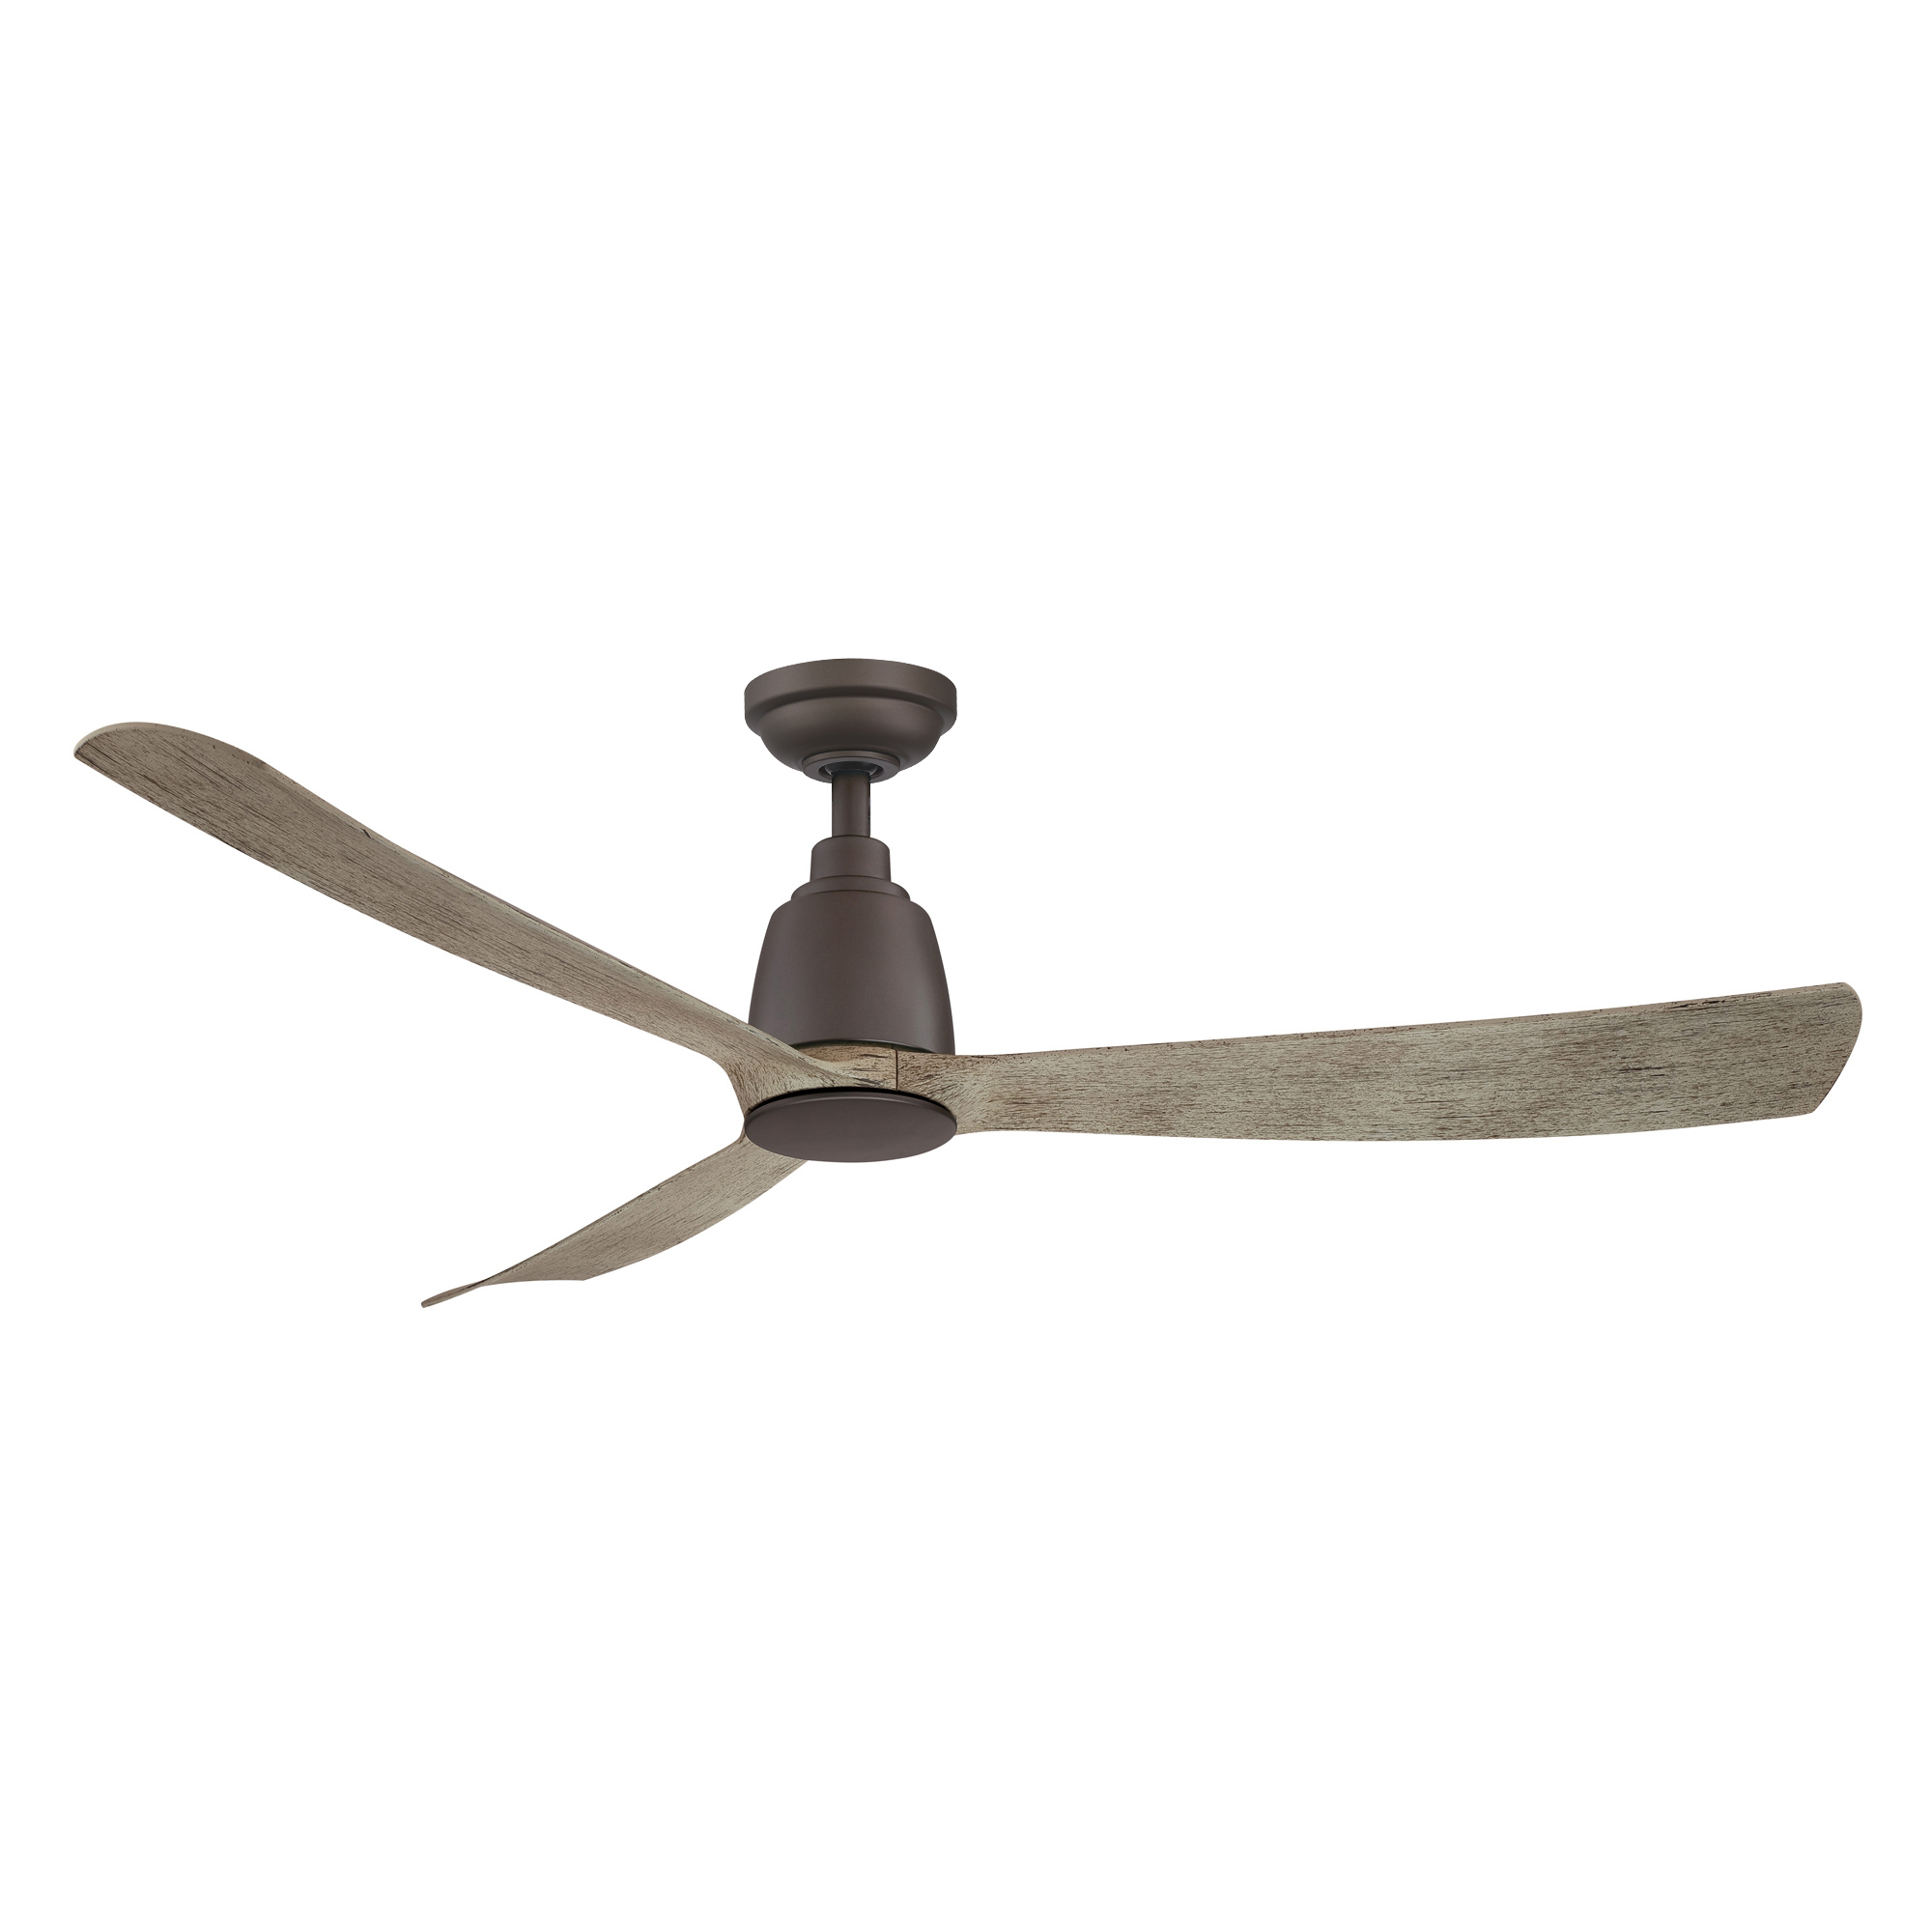 52" Kute DC Ceiling Fan in Graphite with Weathered Wood blades